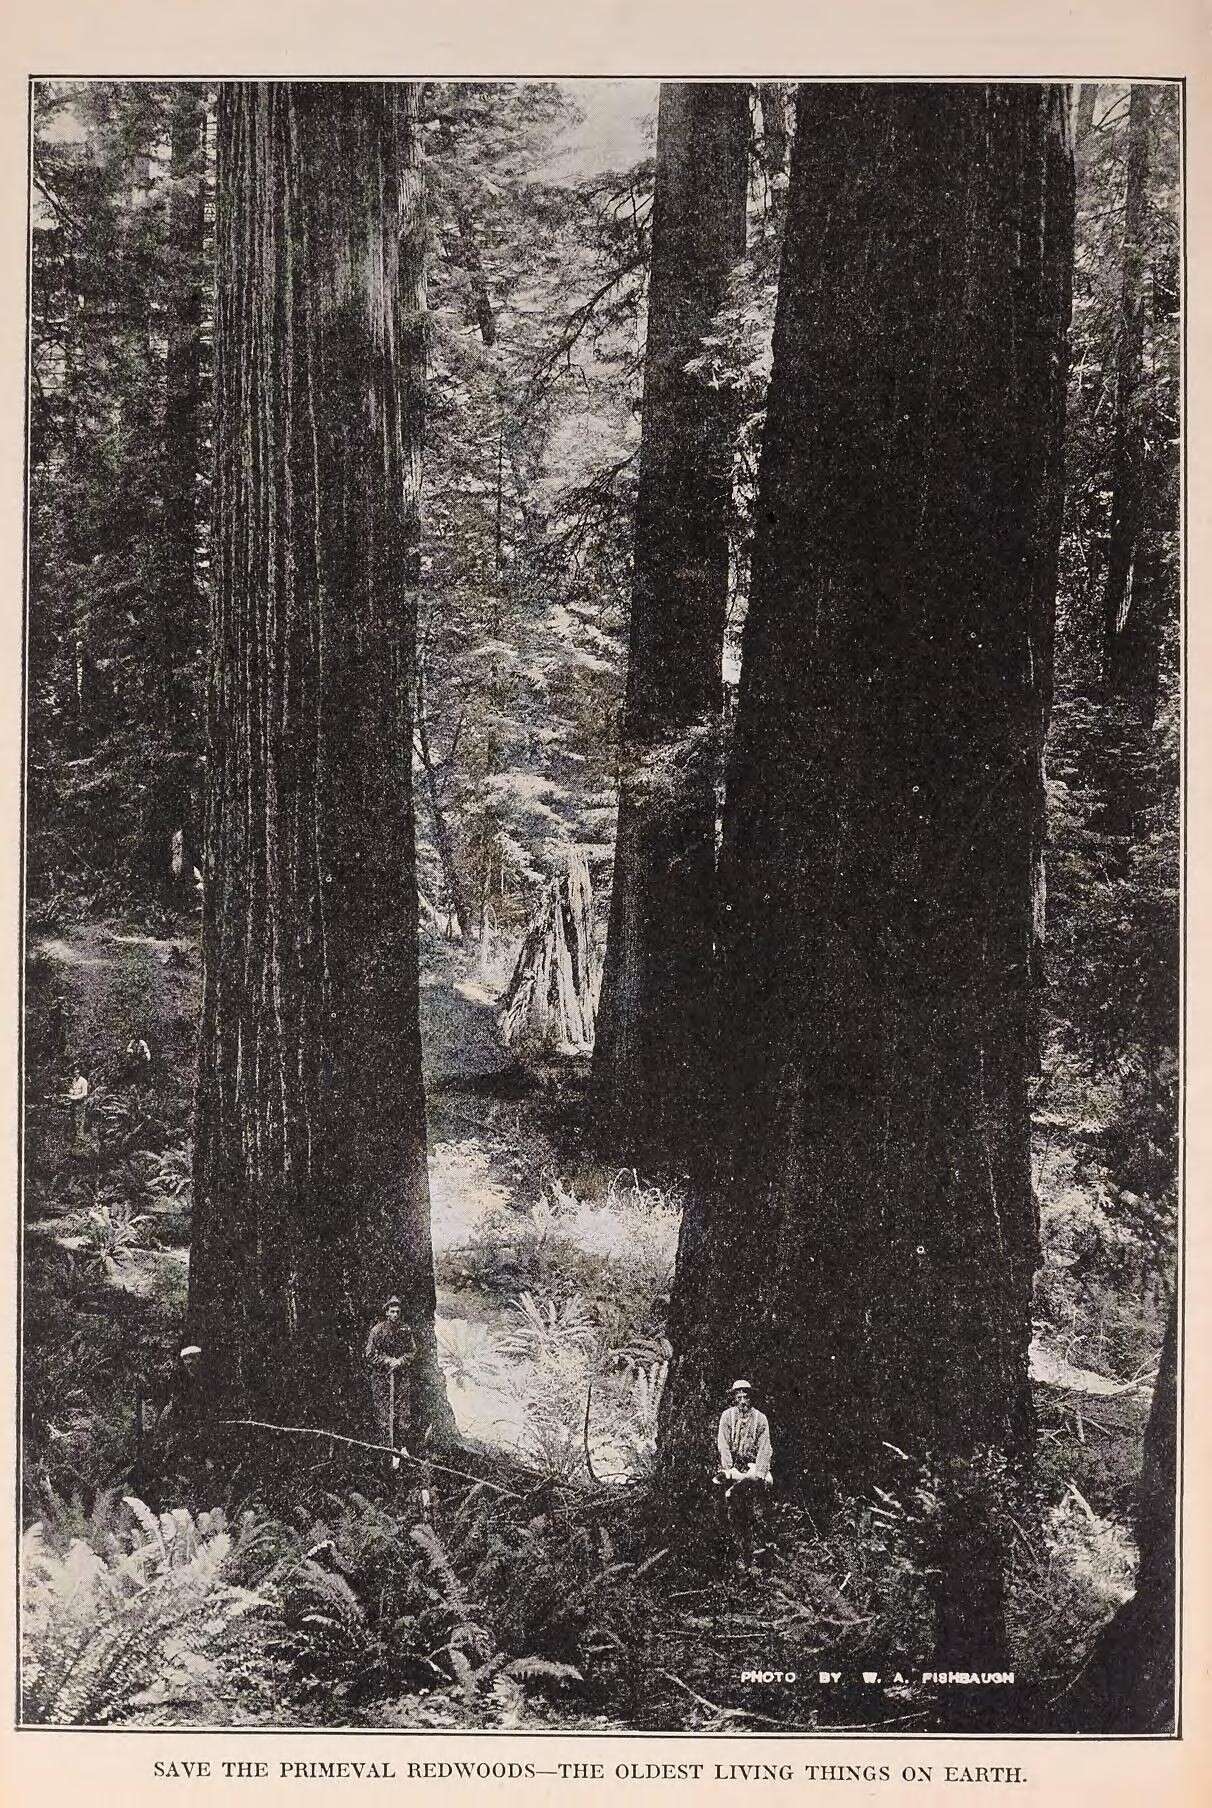 Image of cypress family